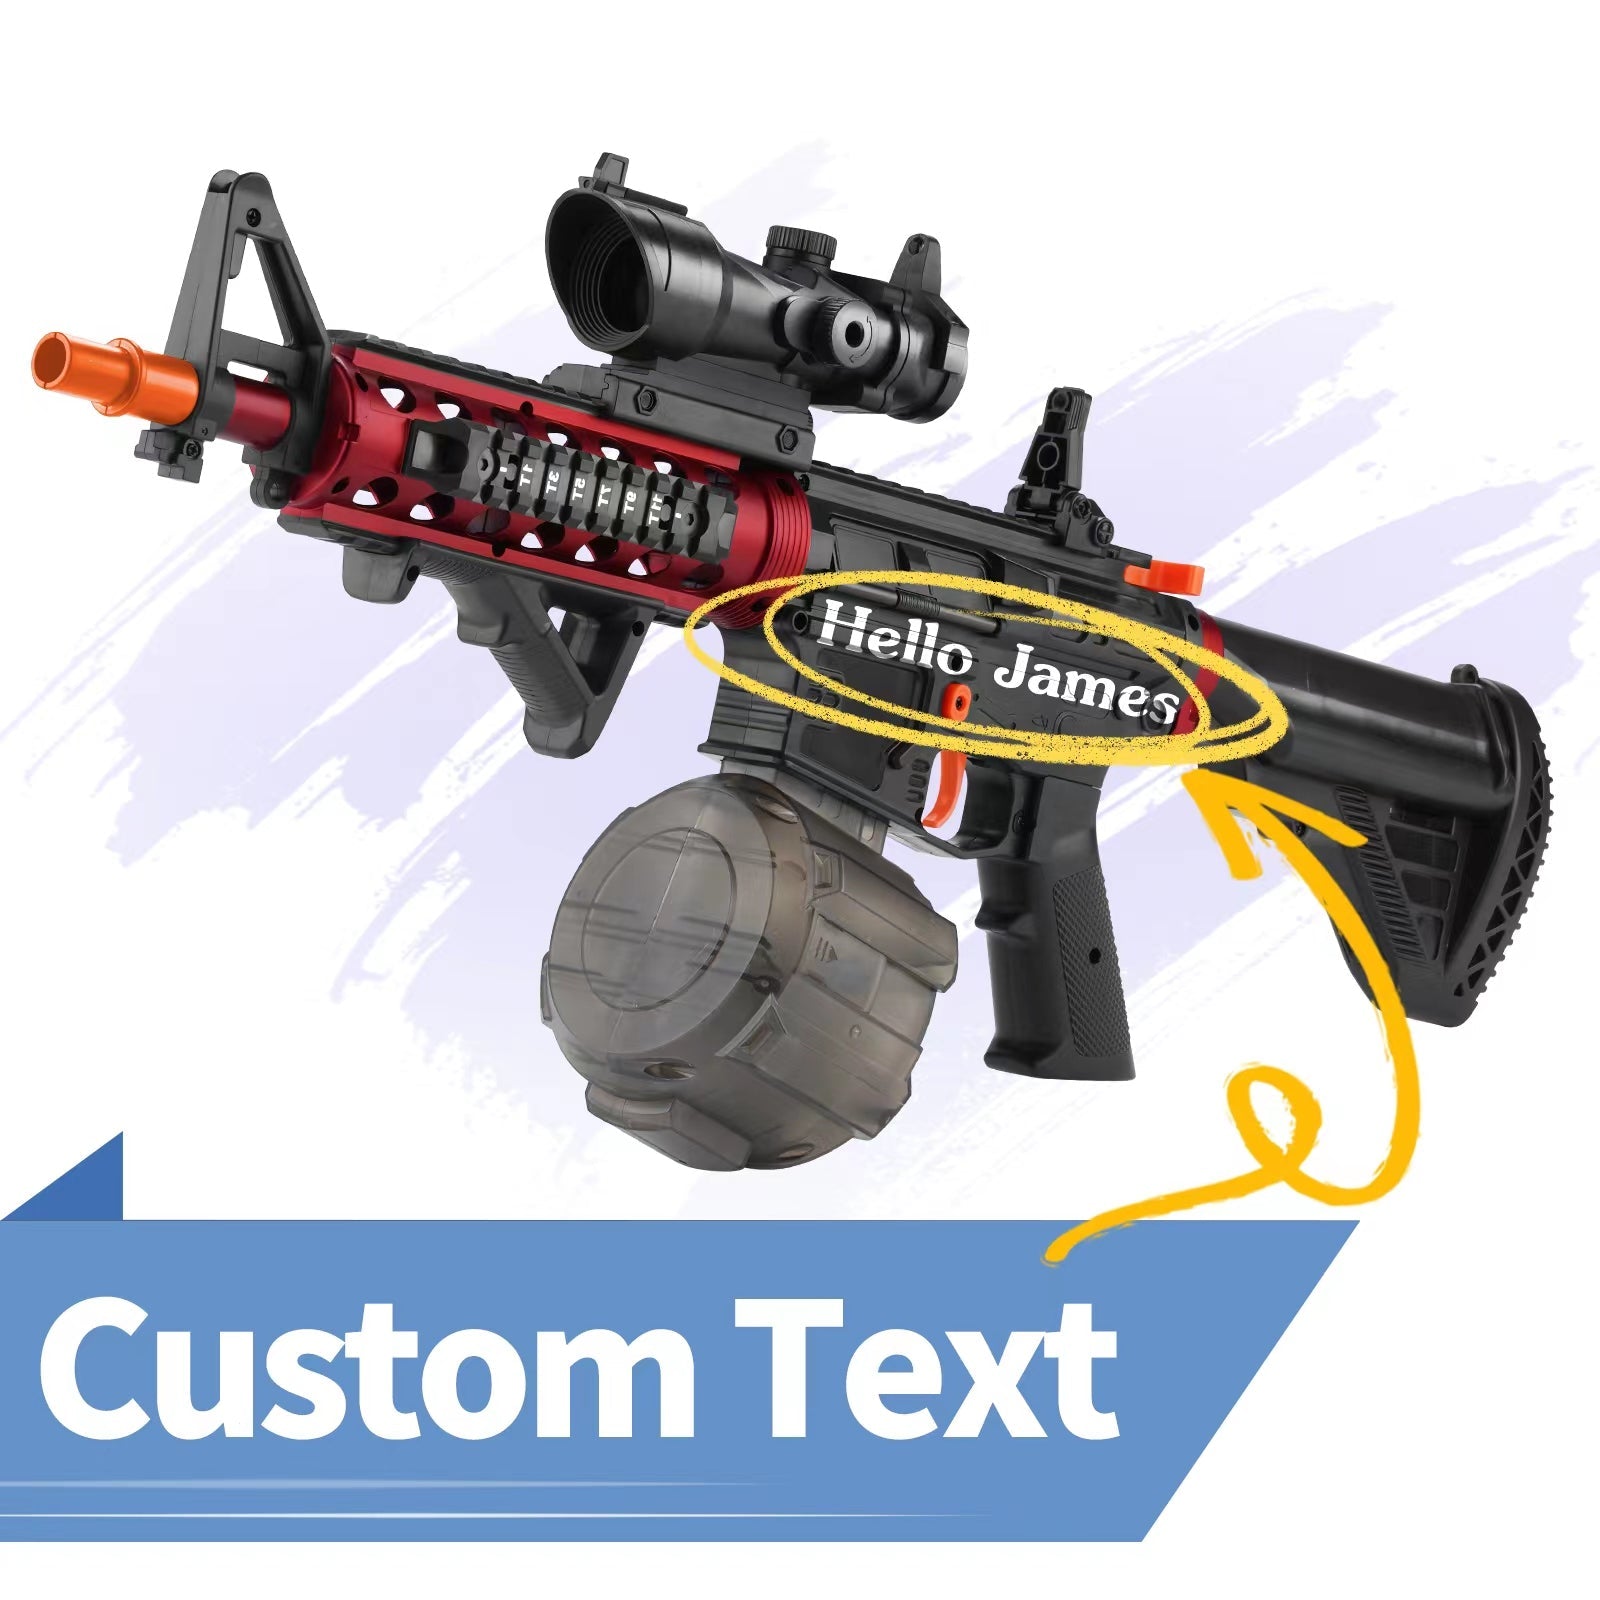 Custom Builds, Tailor-Made Gel Blasters for Your Needs